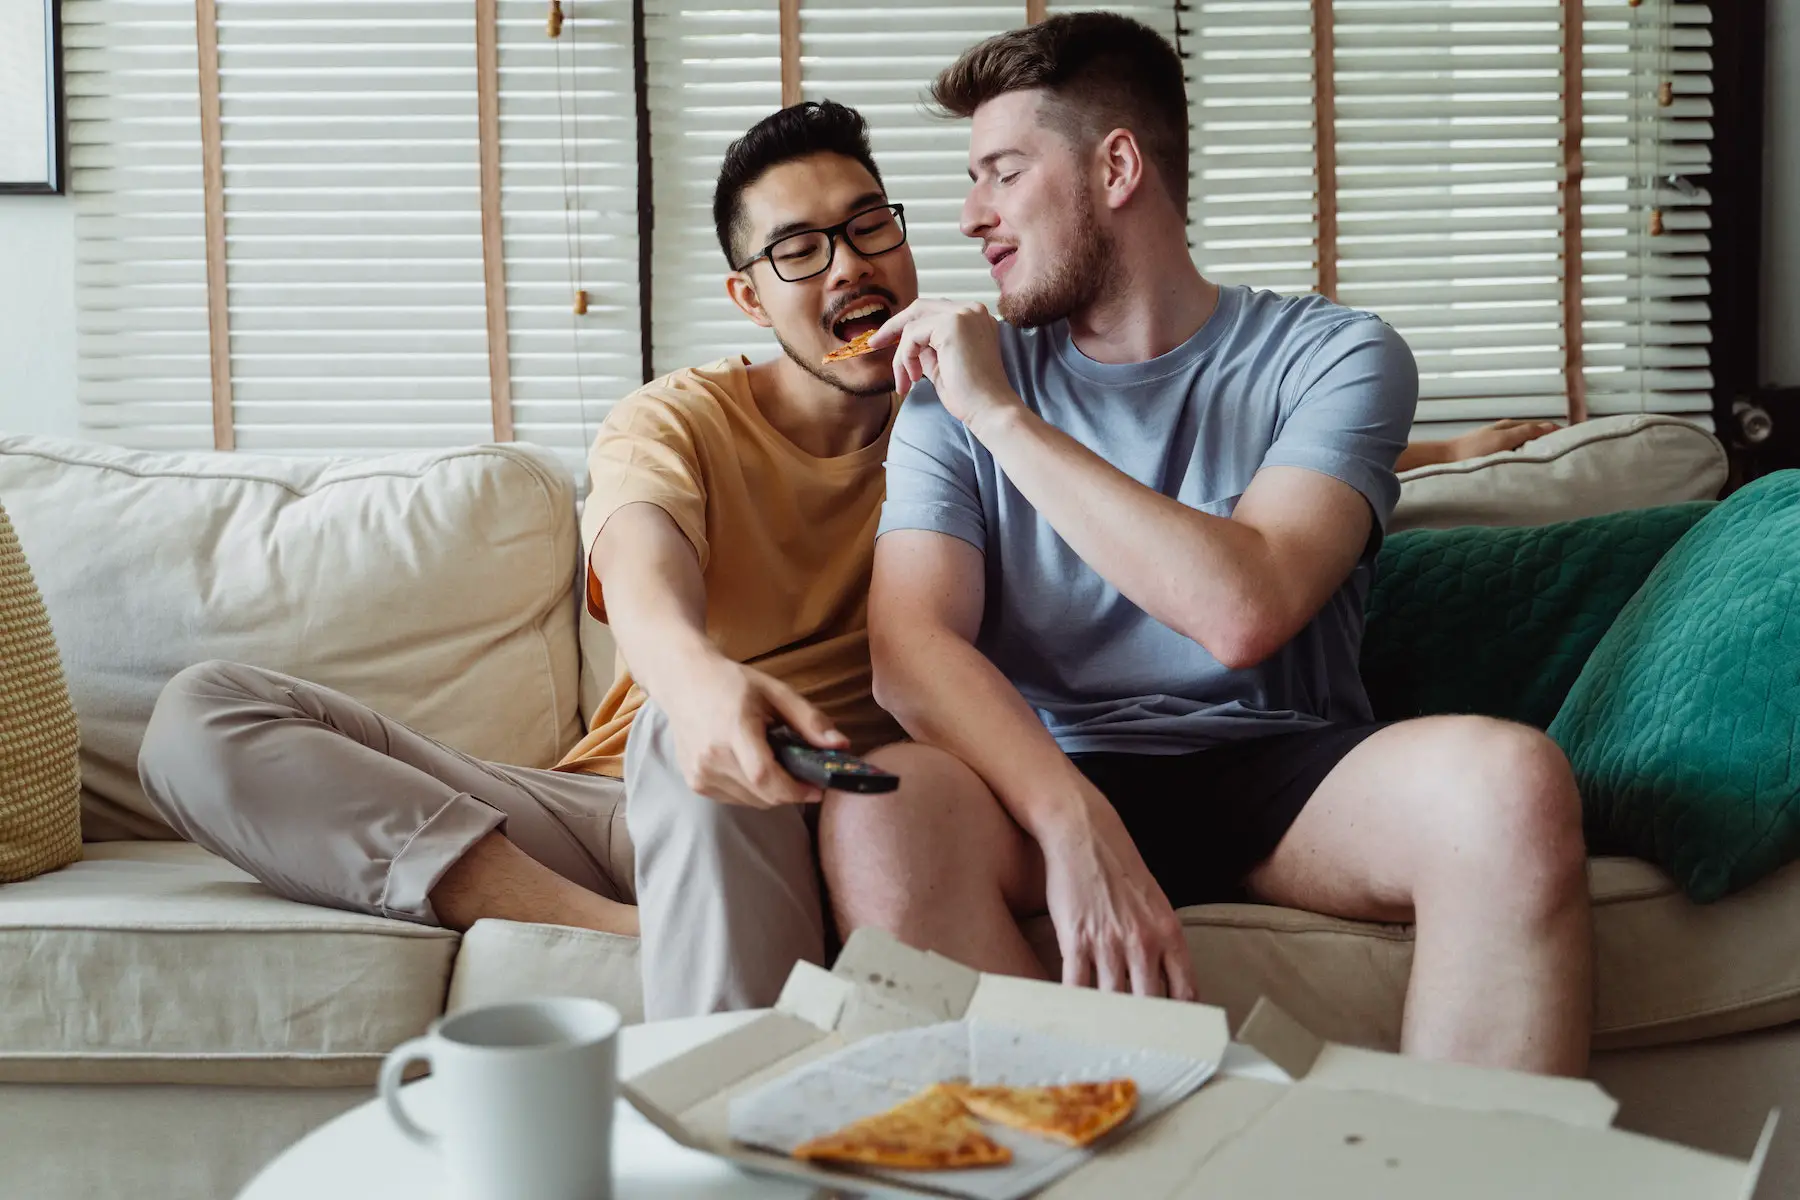 A man feeds his partner pizza on the couch